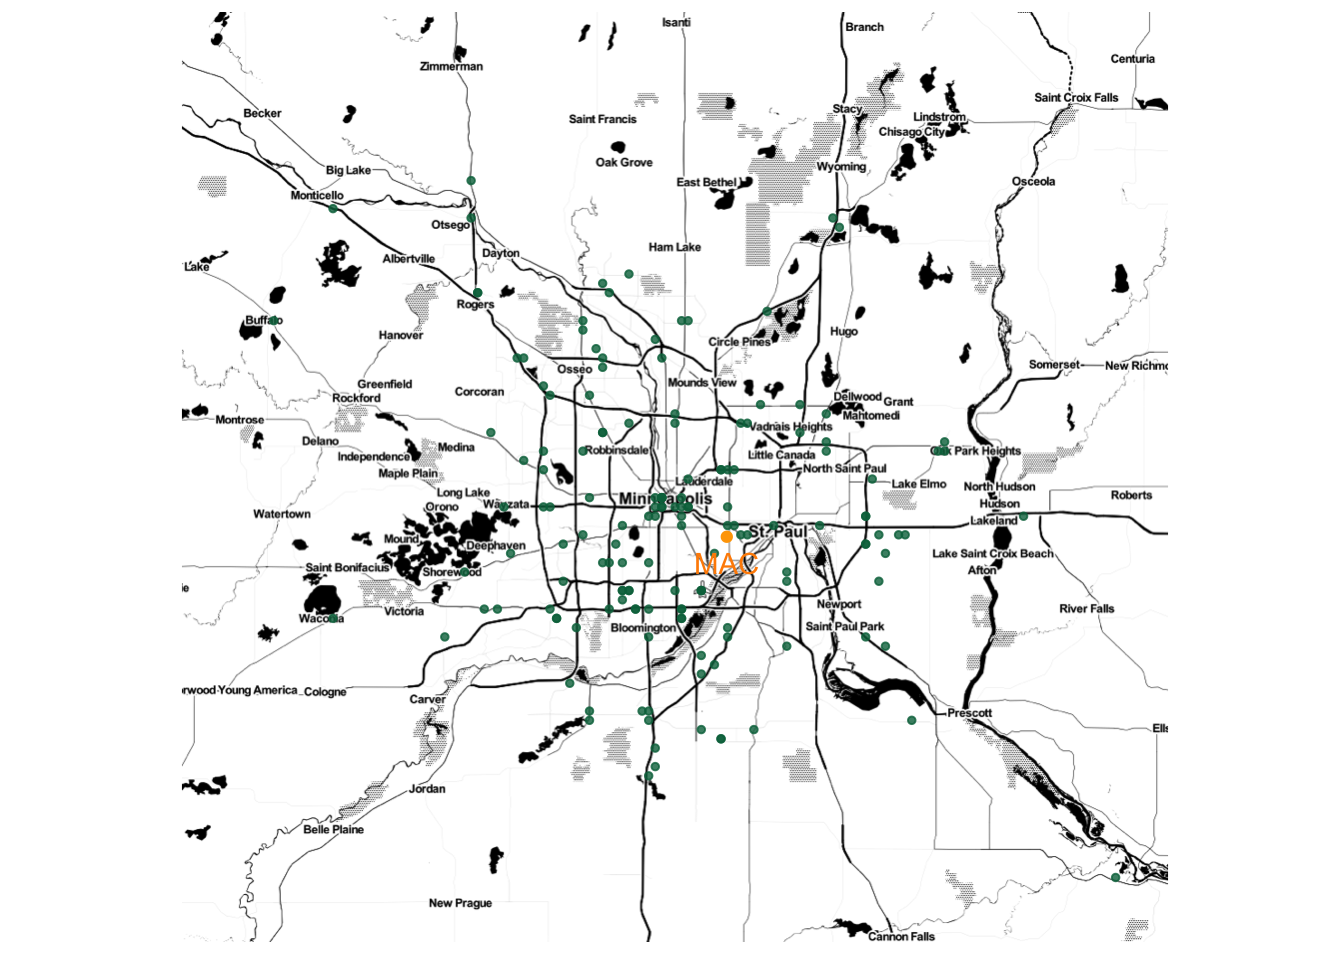 Map of Starbucks locations in the Twin Cities. Most locations are in the city centers or along major highways.